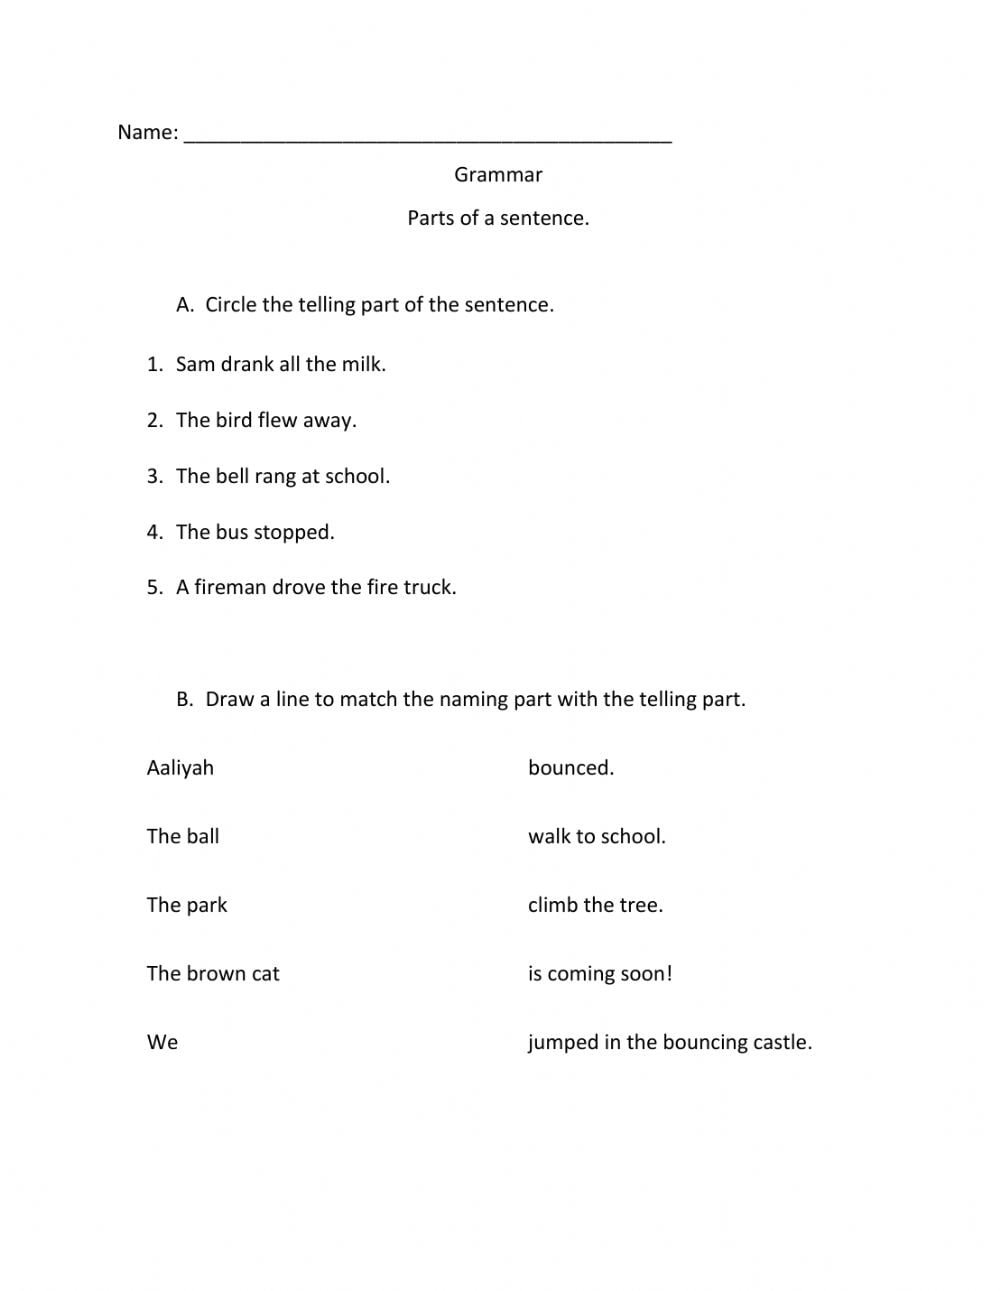 kids-are-asked-to-read-each-sentence-and-determine-whethe-english-worksheets-for-kids